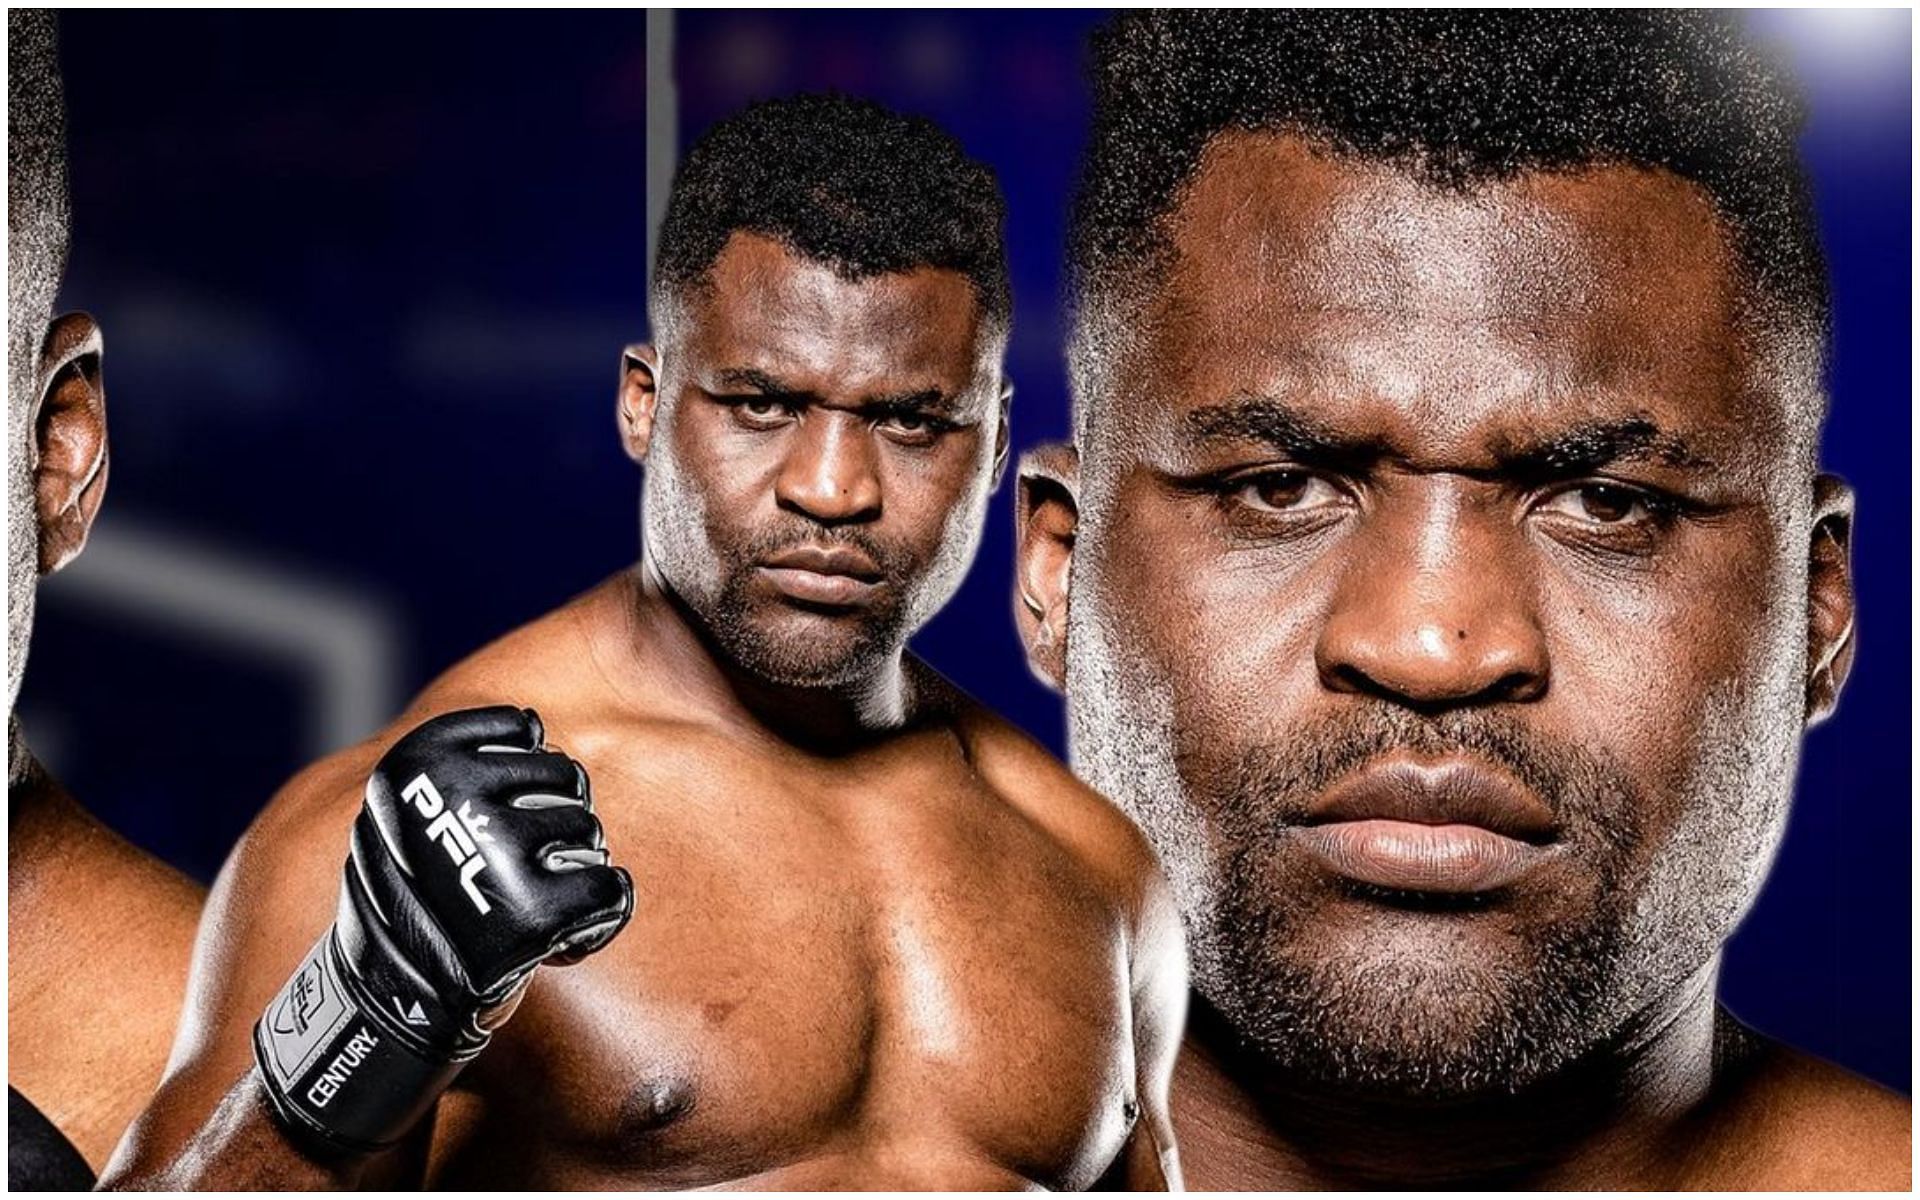 Francis Ngannou in PFL gear